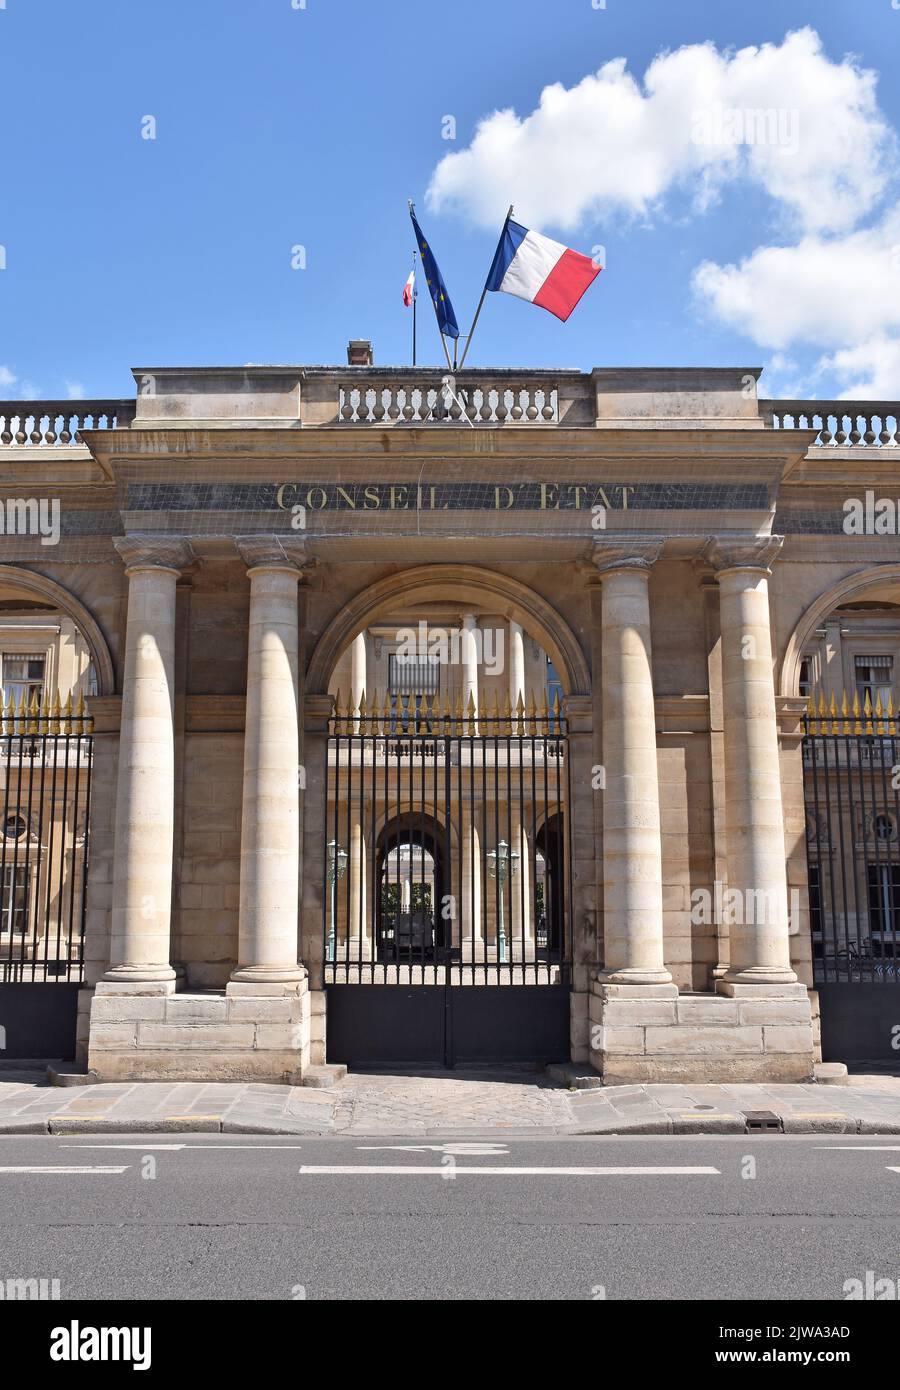 The screen of the southern entrance to the Palais Royale on r. St. Honoré, opening into the Cour de l’Horloge, & the building of the Conseil d'Etat Stock Photo